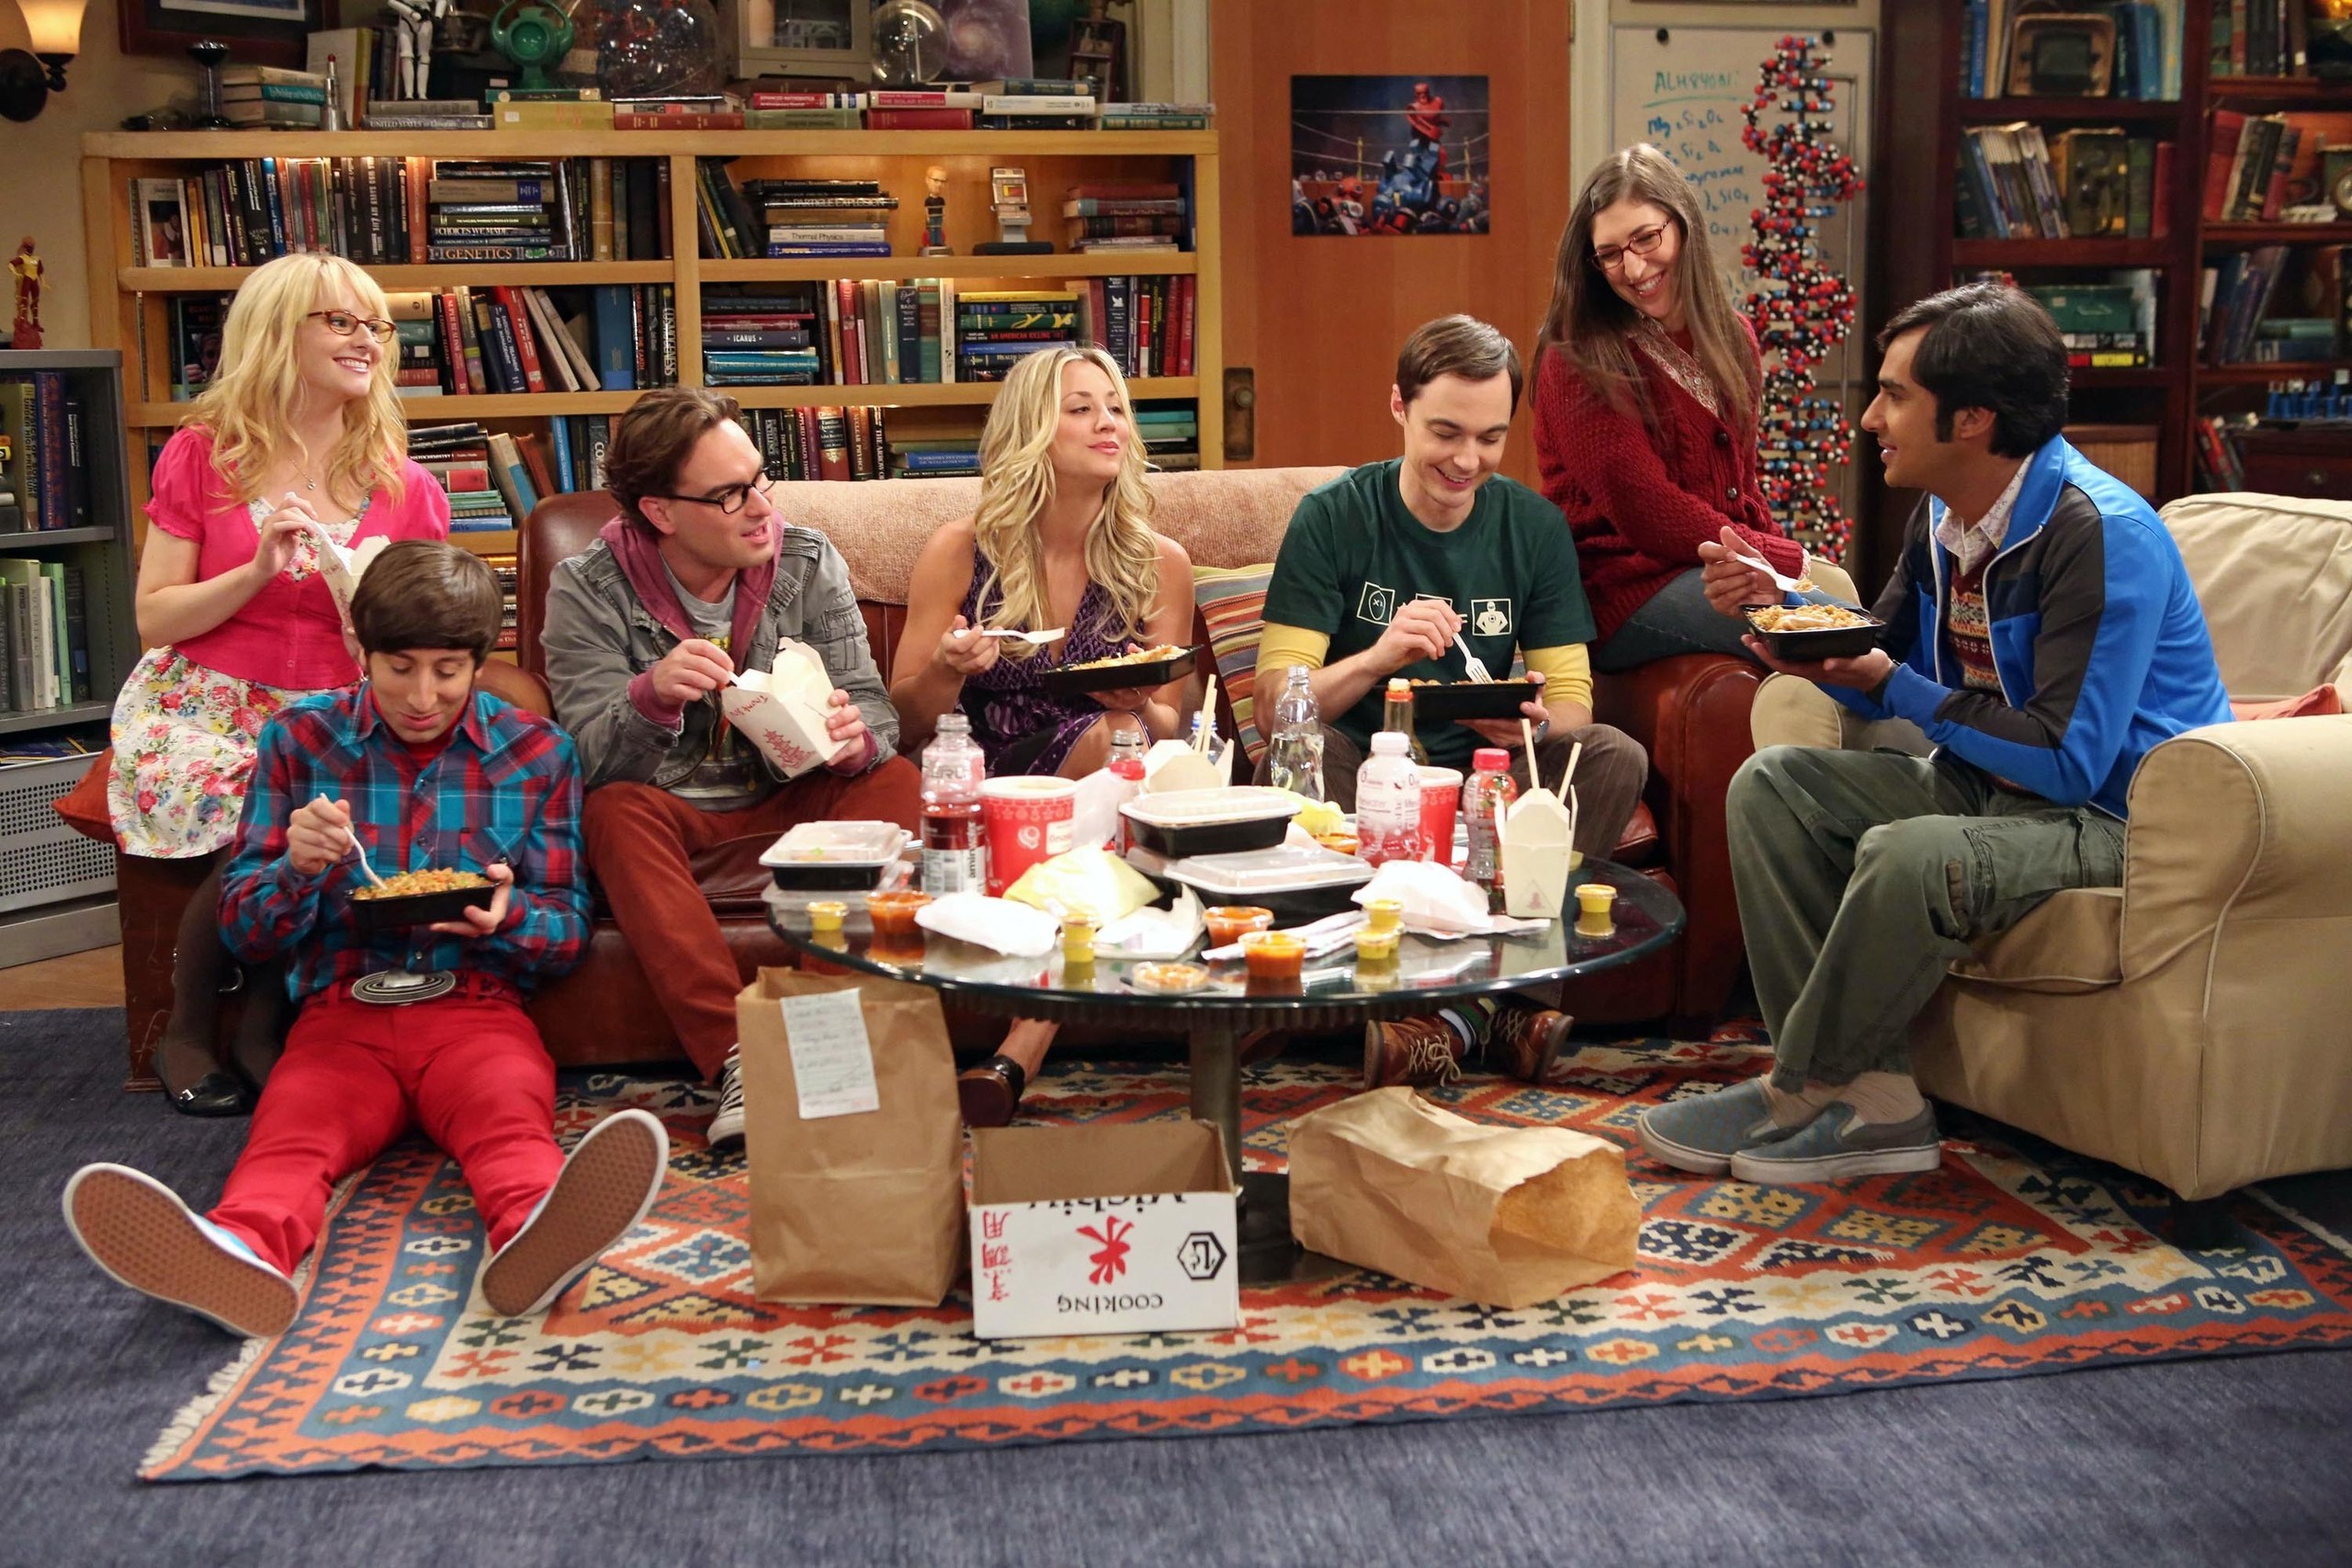 Free Download 140 The Big Bang Theory Hd Wallpapers And Backgrounds [2560x1707] For Your Desktop